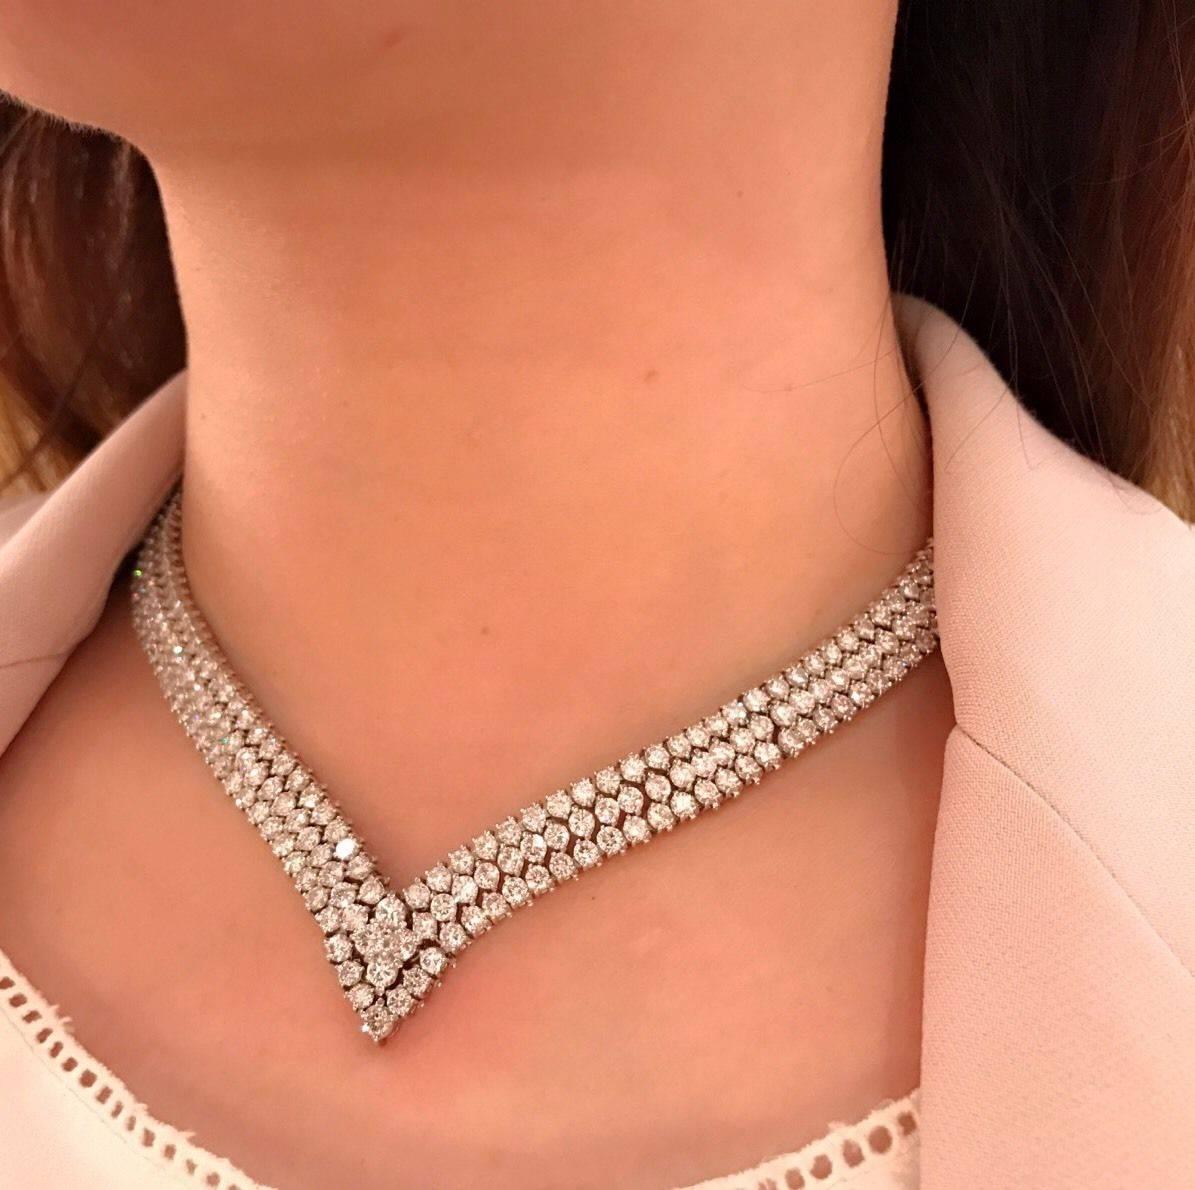 Fine quality diamond choker necklace with three rows of diamond and V-shaped, set in Platinum. There are a total of 41.25 carats of round brilliant diamonds, VS in clarity and H in color. Center row of diamonds is slightly larger than outer rows.